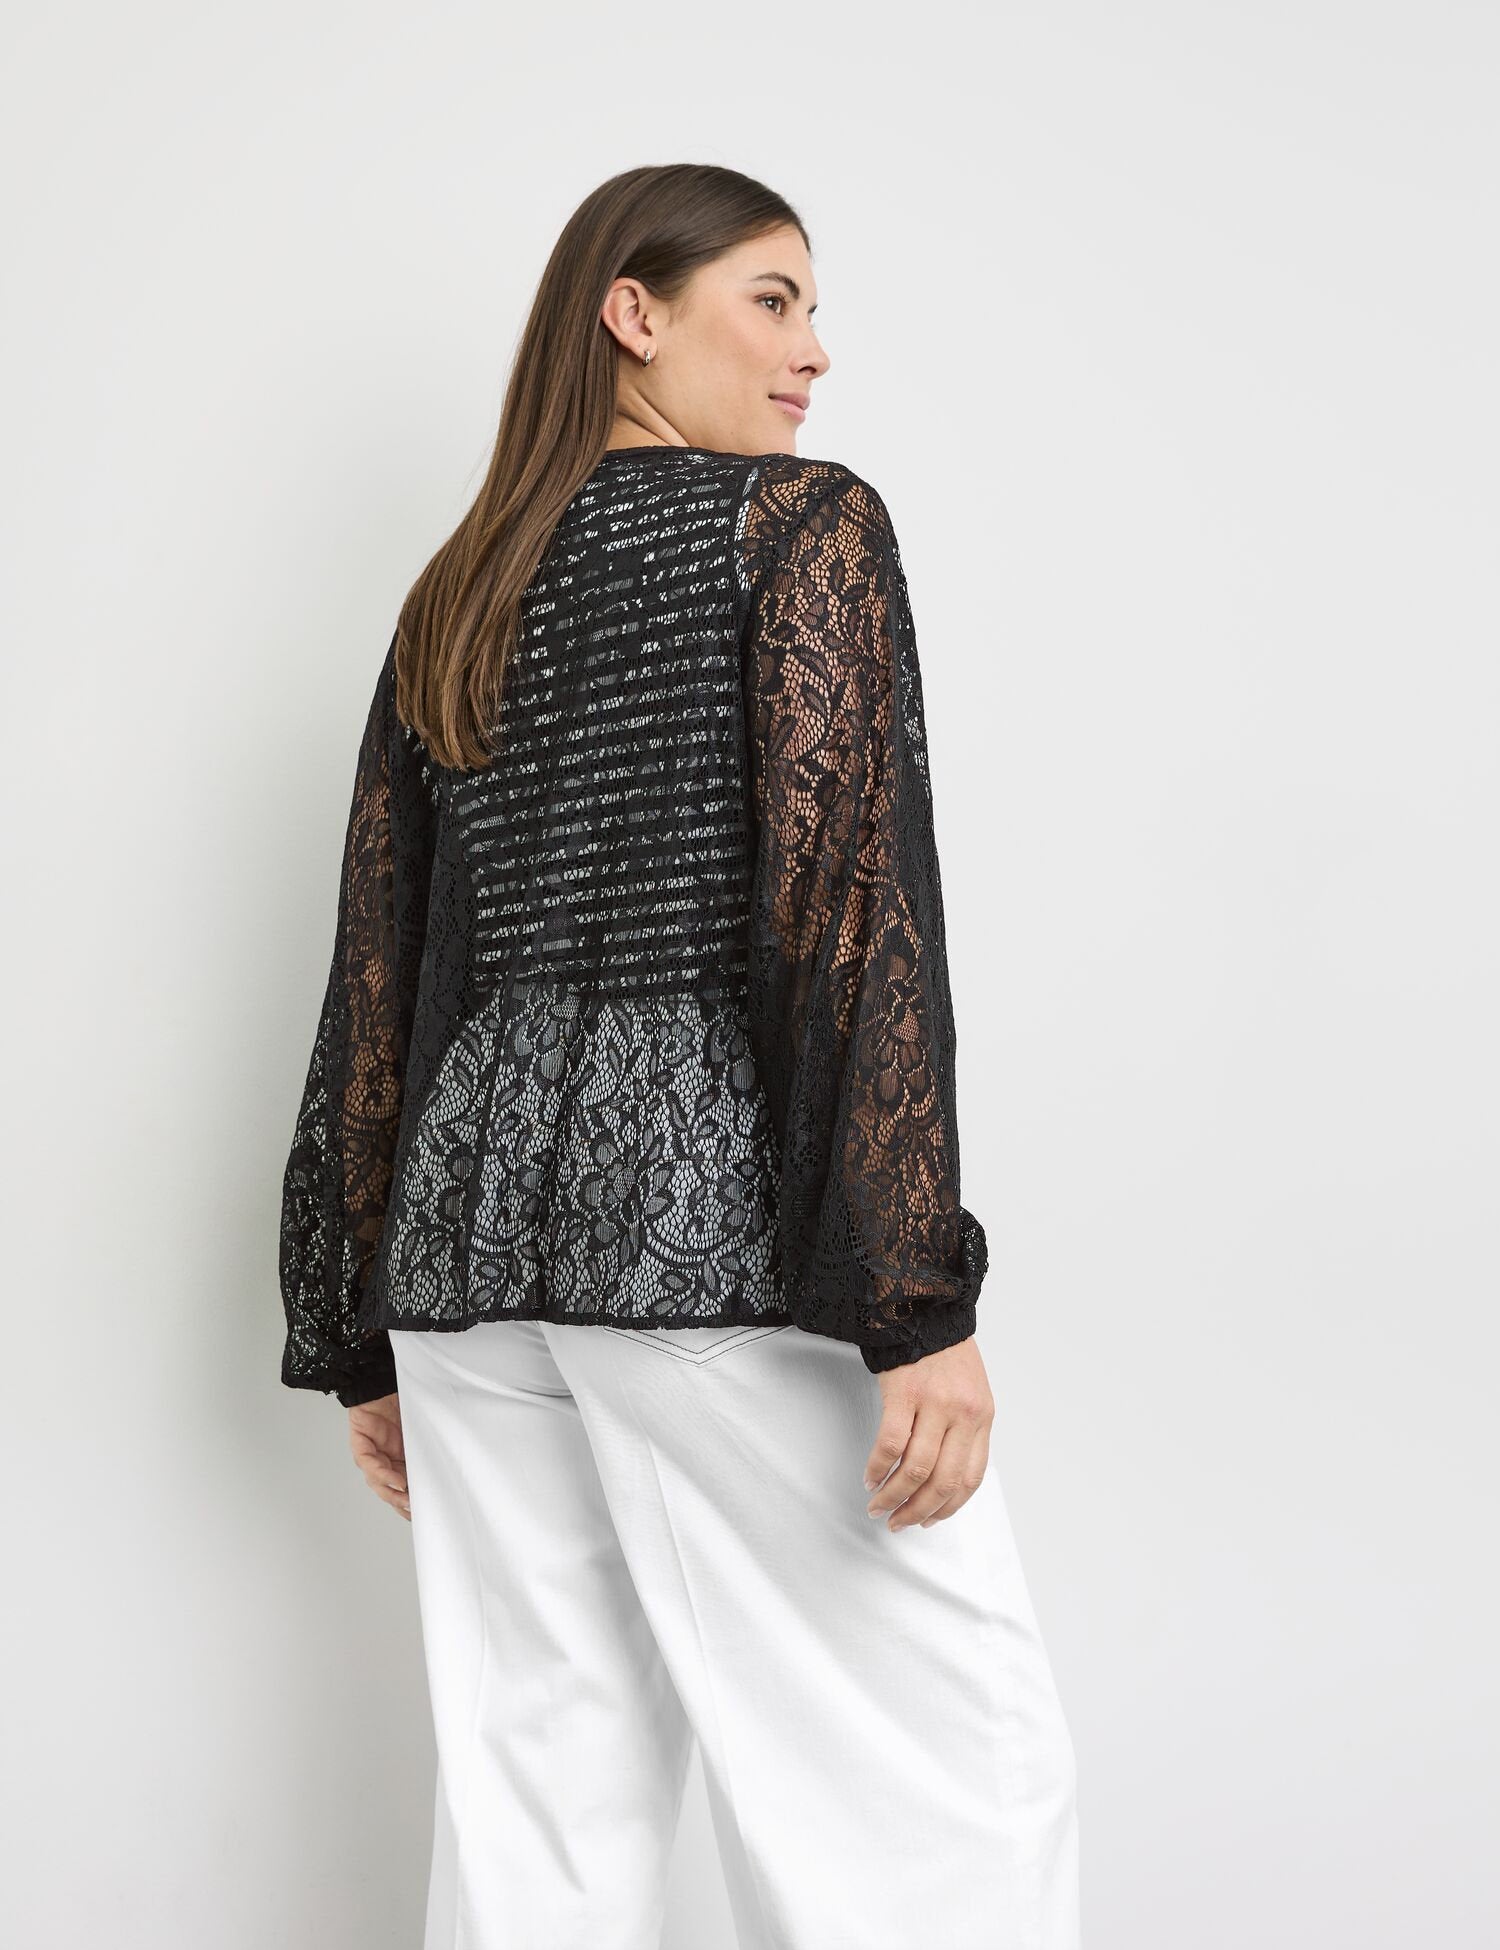 Lace Blouse With Balloon Sleeves_460023-21056_1100_06